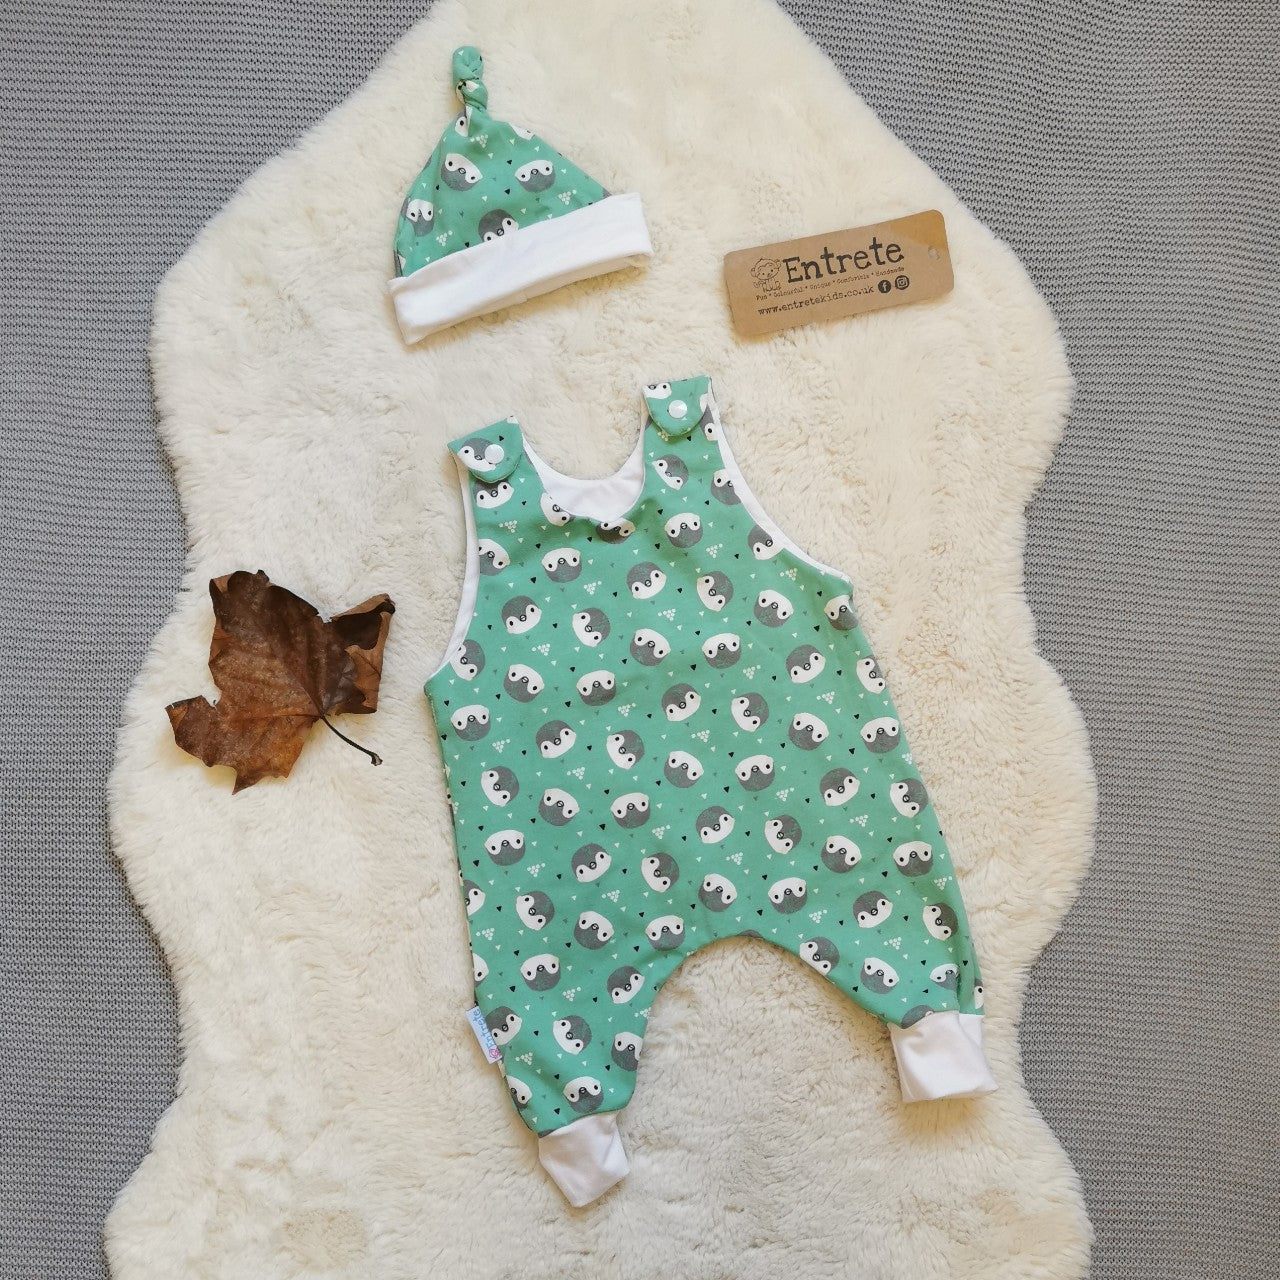 Romper gift set, shown in mint penguins cotton jersey for demonstration purposes only. Yours will be handmade using the gorgeously colourful speckled galaxy cotton jersey.